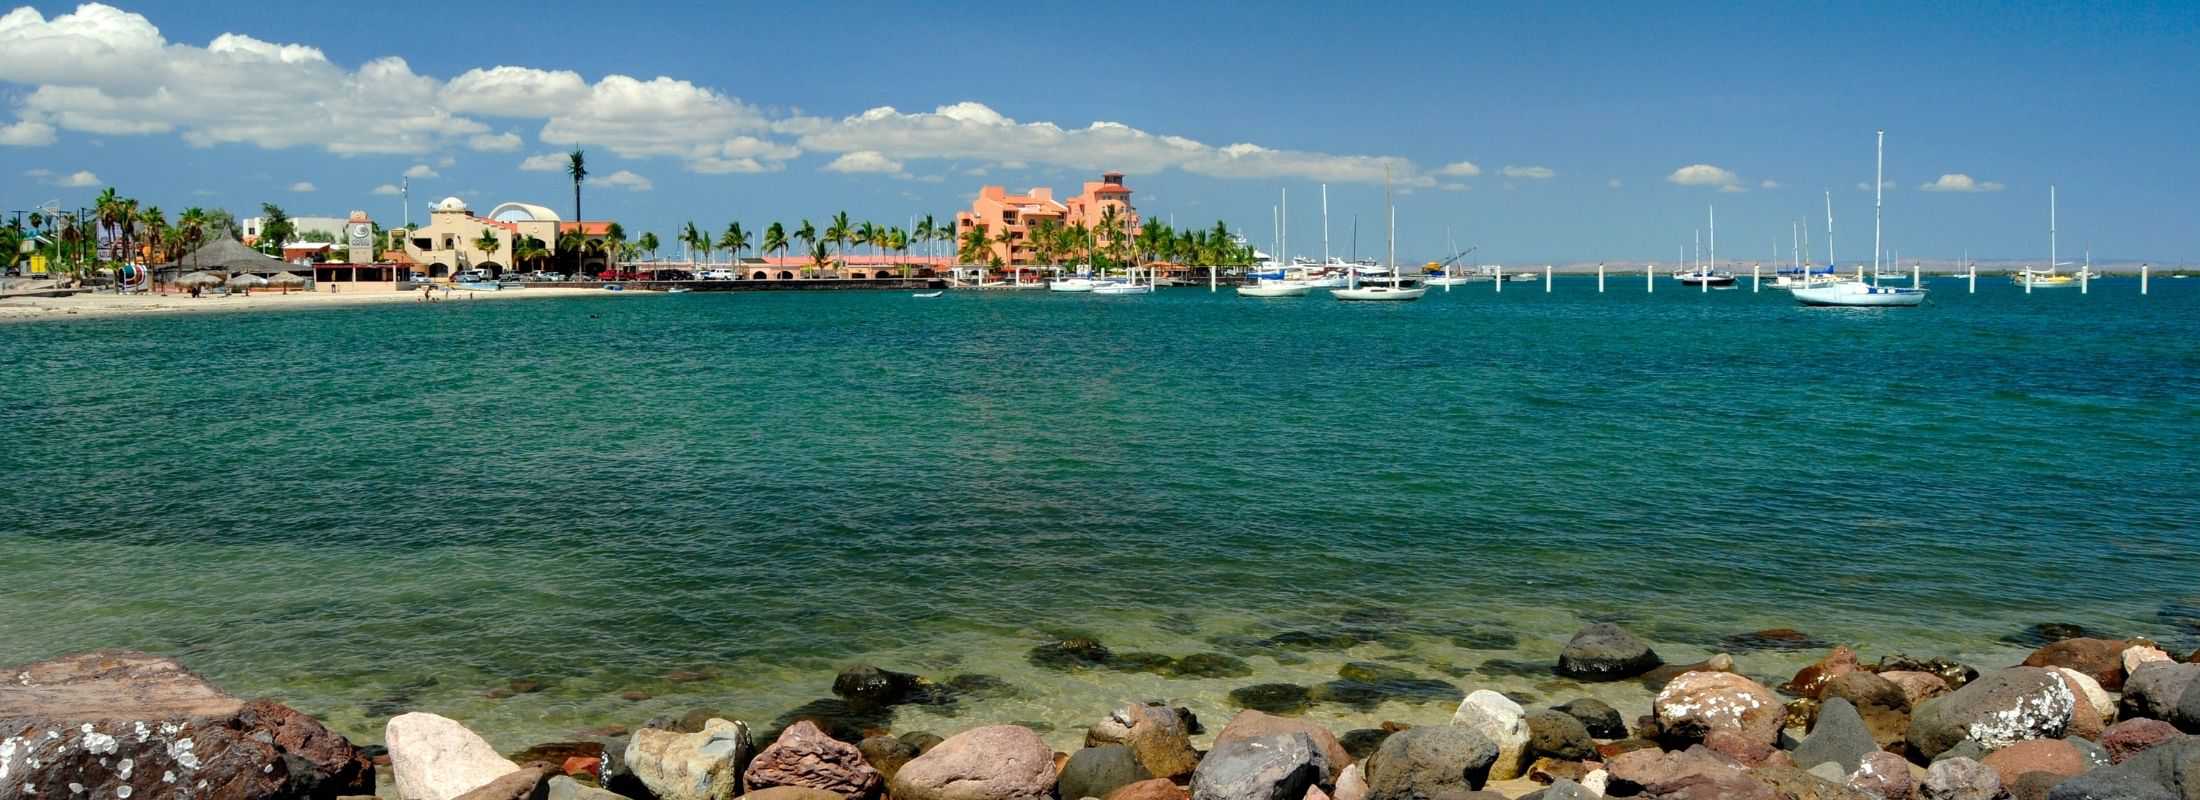 Beach front in La Paz with luxury houses and sailboats